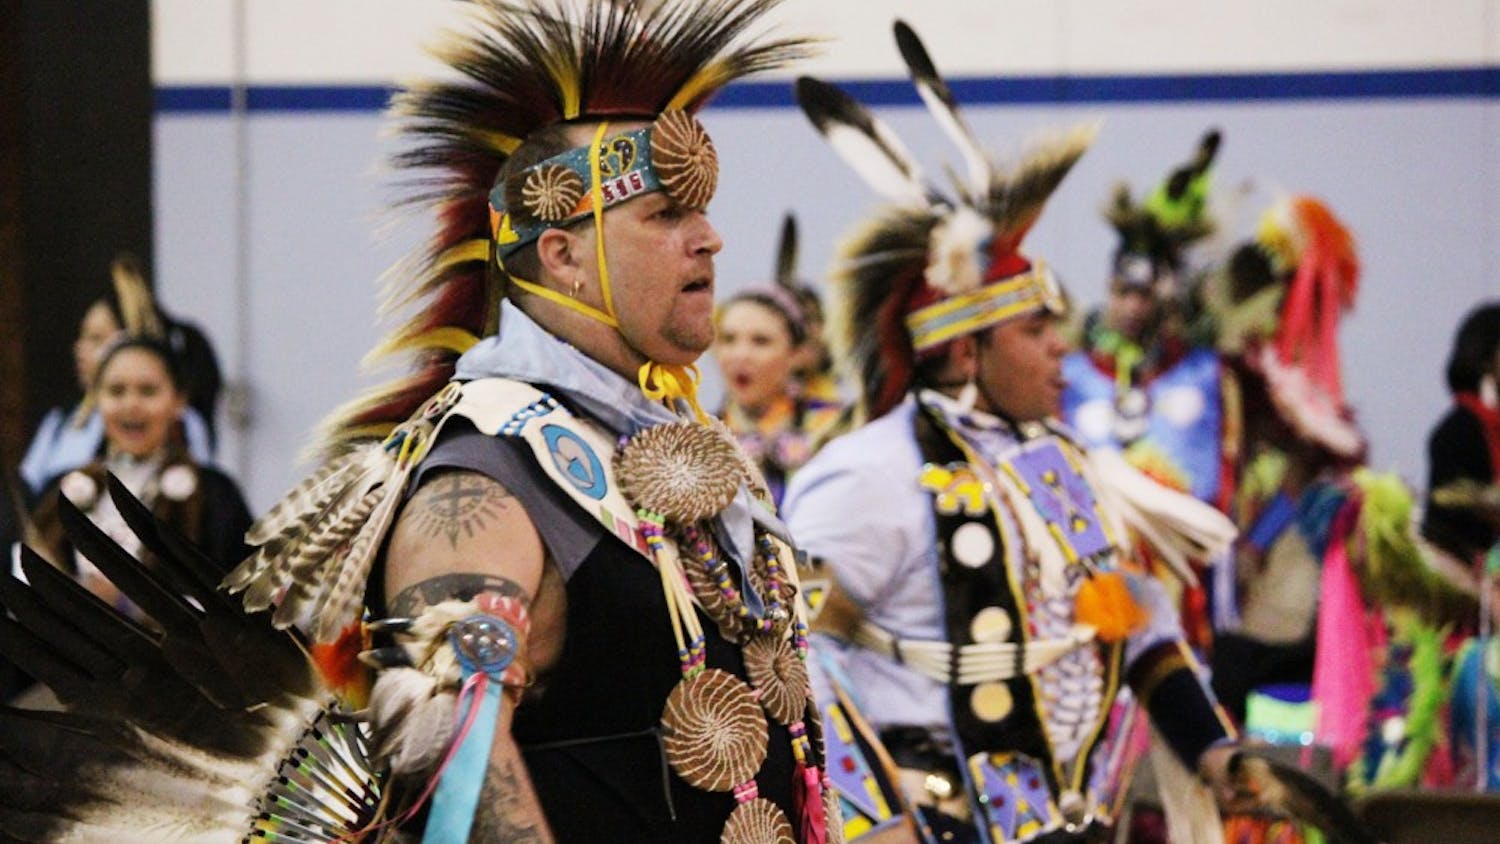 The Carolina Indian Circle Powwow was held this year in honor of Faith Hedgepeth.  